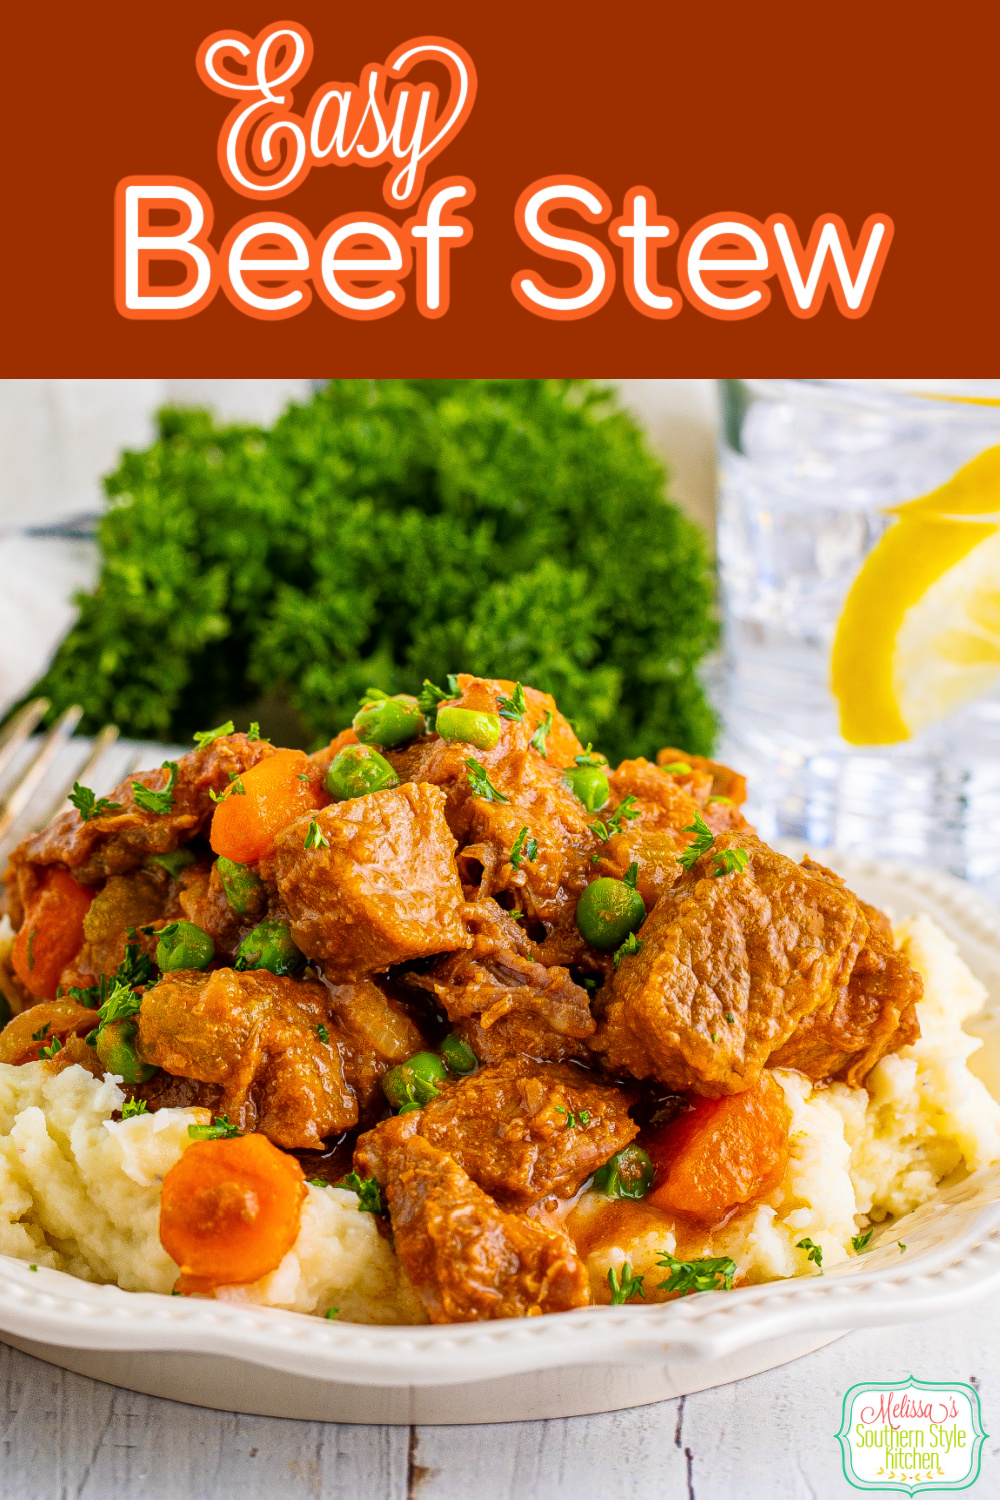 This Easy Beef Stew recipe features a hearty combination of beef and veggies that simmers in the oven until they're tender and flavorful. #beefstew #braiedbeef #stew #easybeefstew #easybeefrecipes #roast #stewbeef via @melissasssk